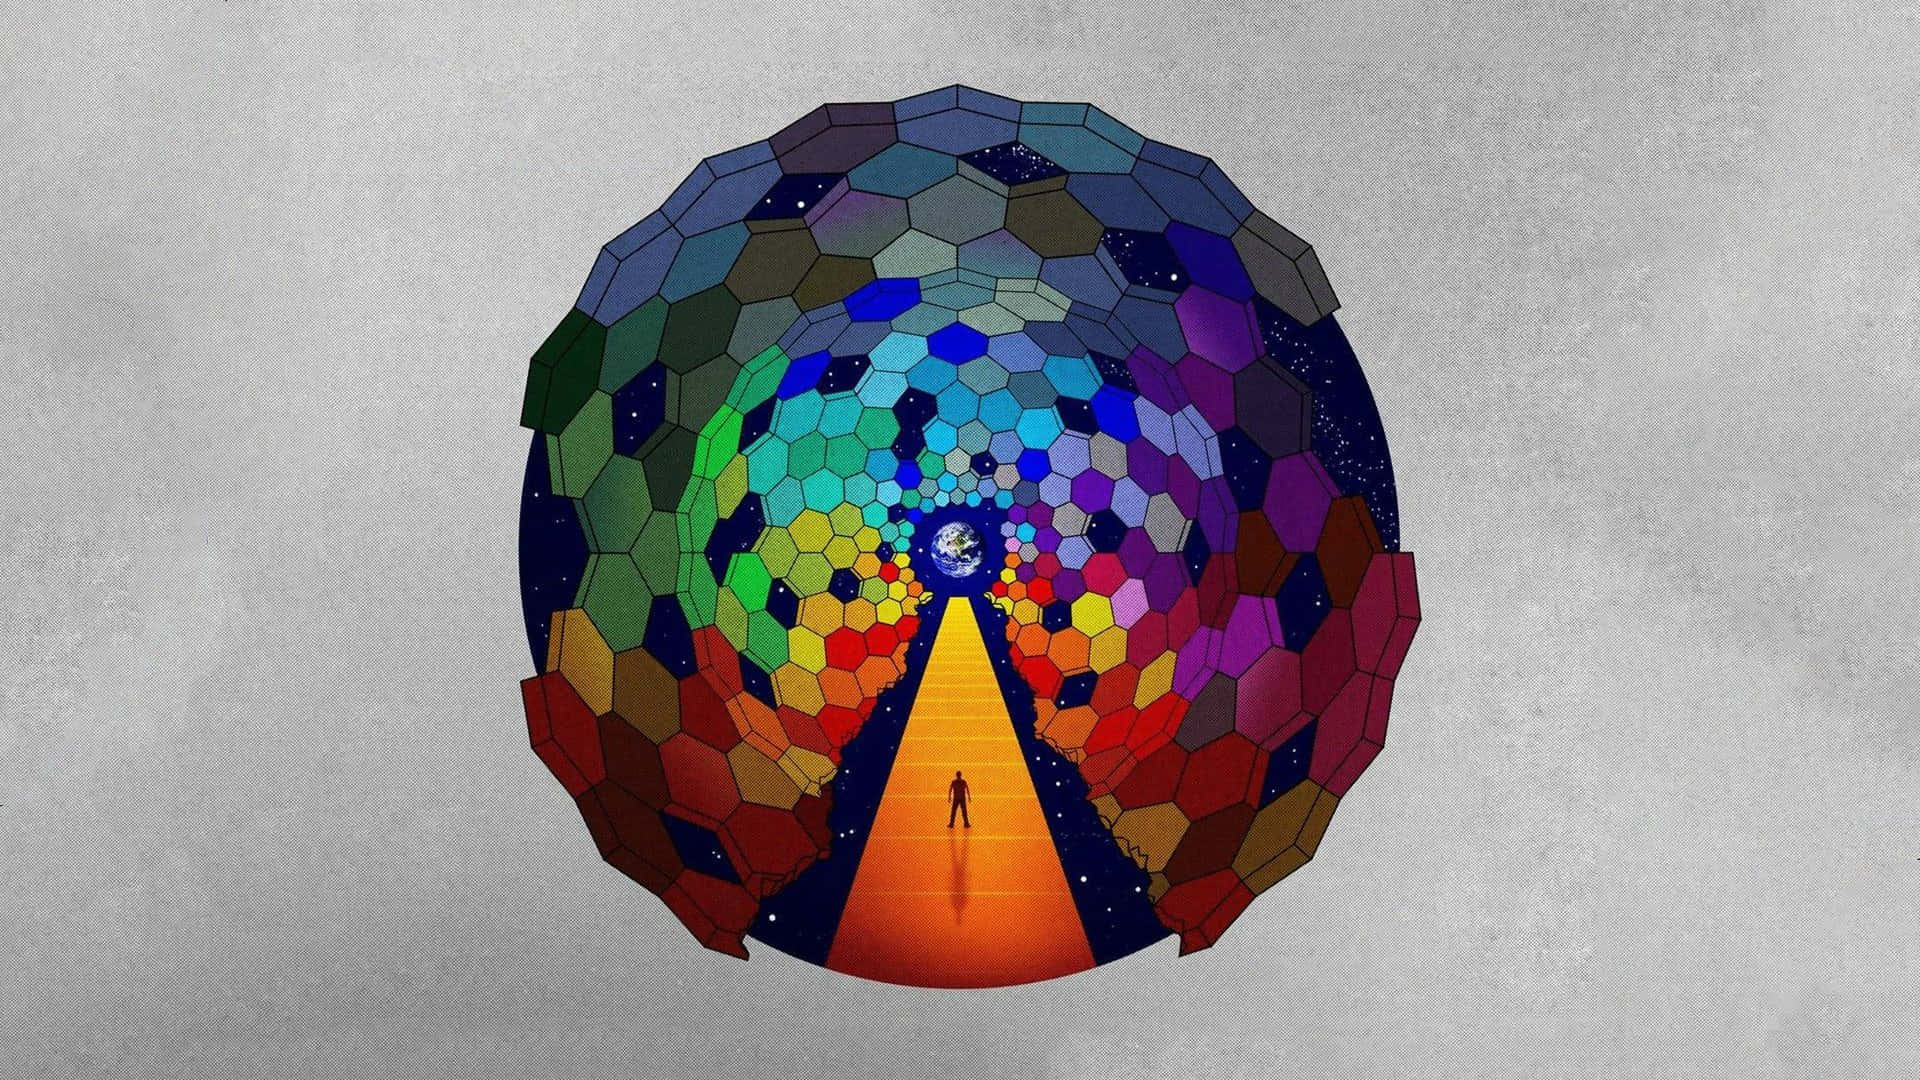 Colorful Geodesic Dome Artwork Wallpaper